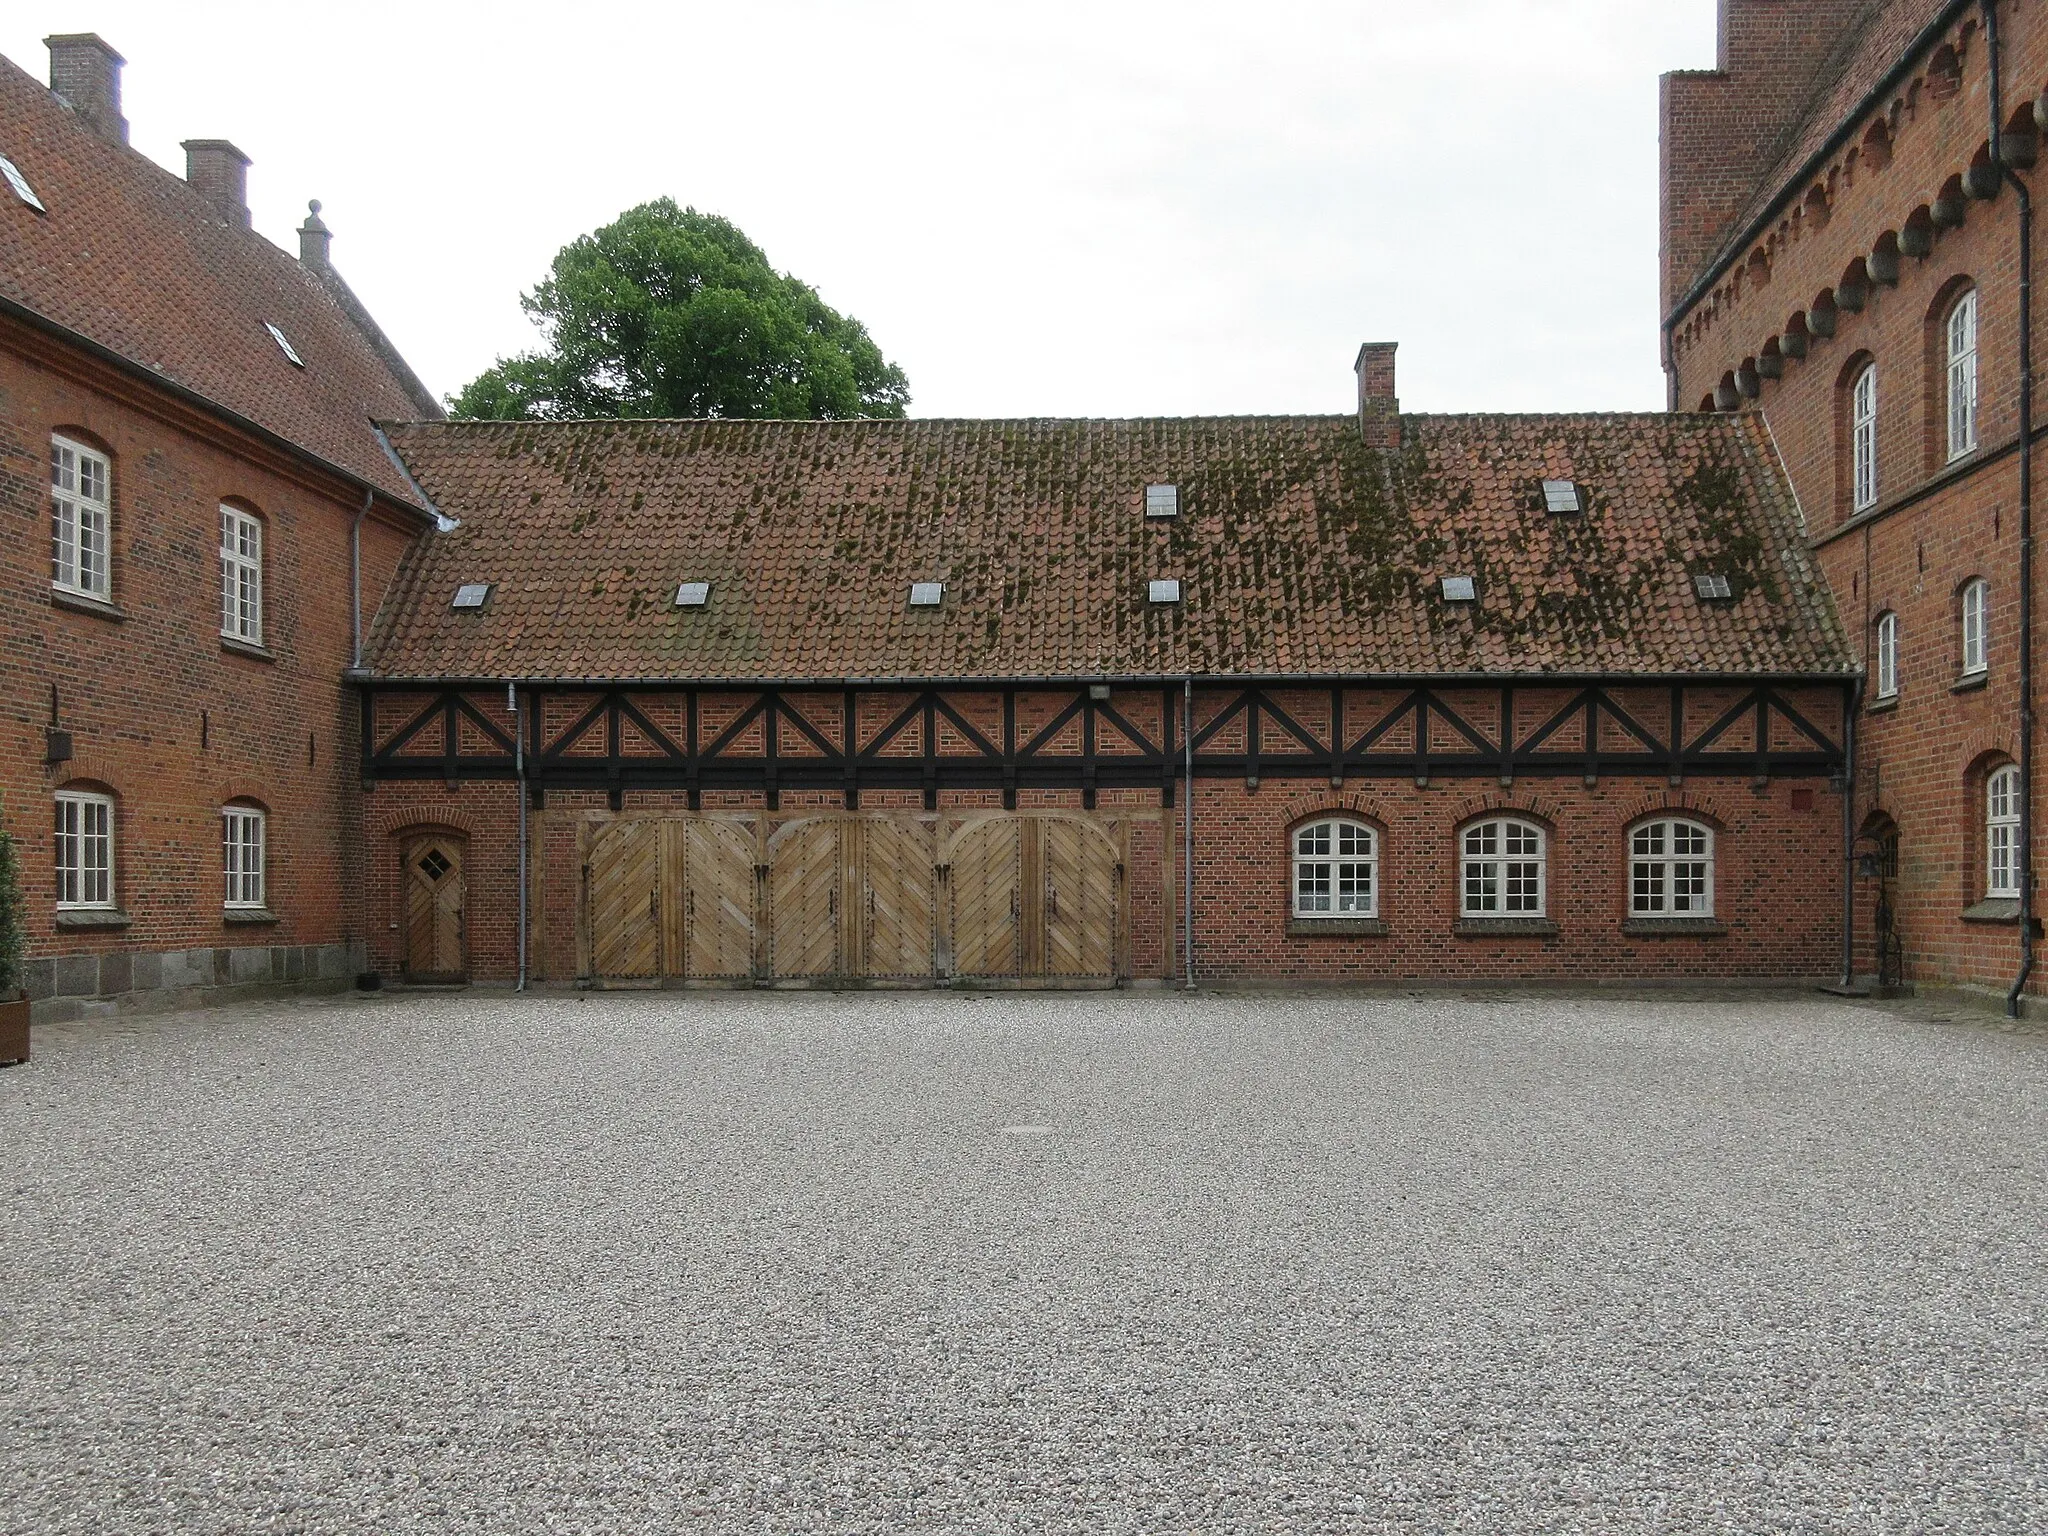 Photo showing: One of the side wings of Grev Knuths Hus, part of Guisselfeld, Denmark